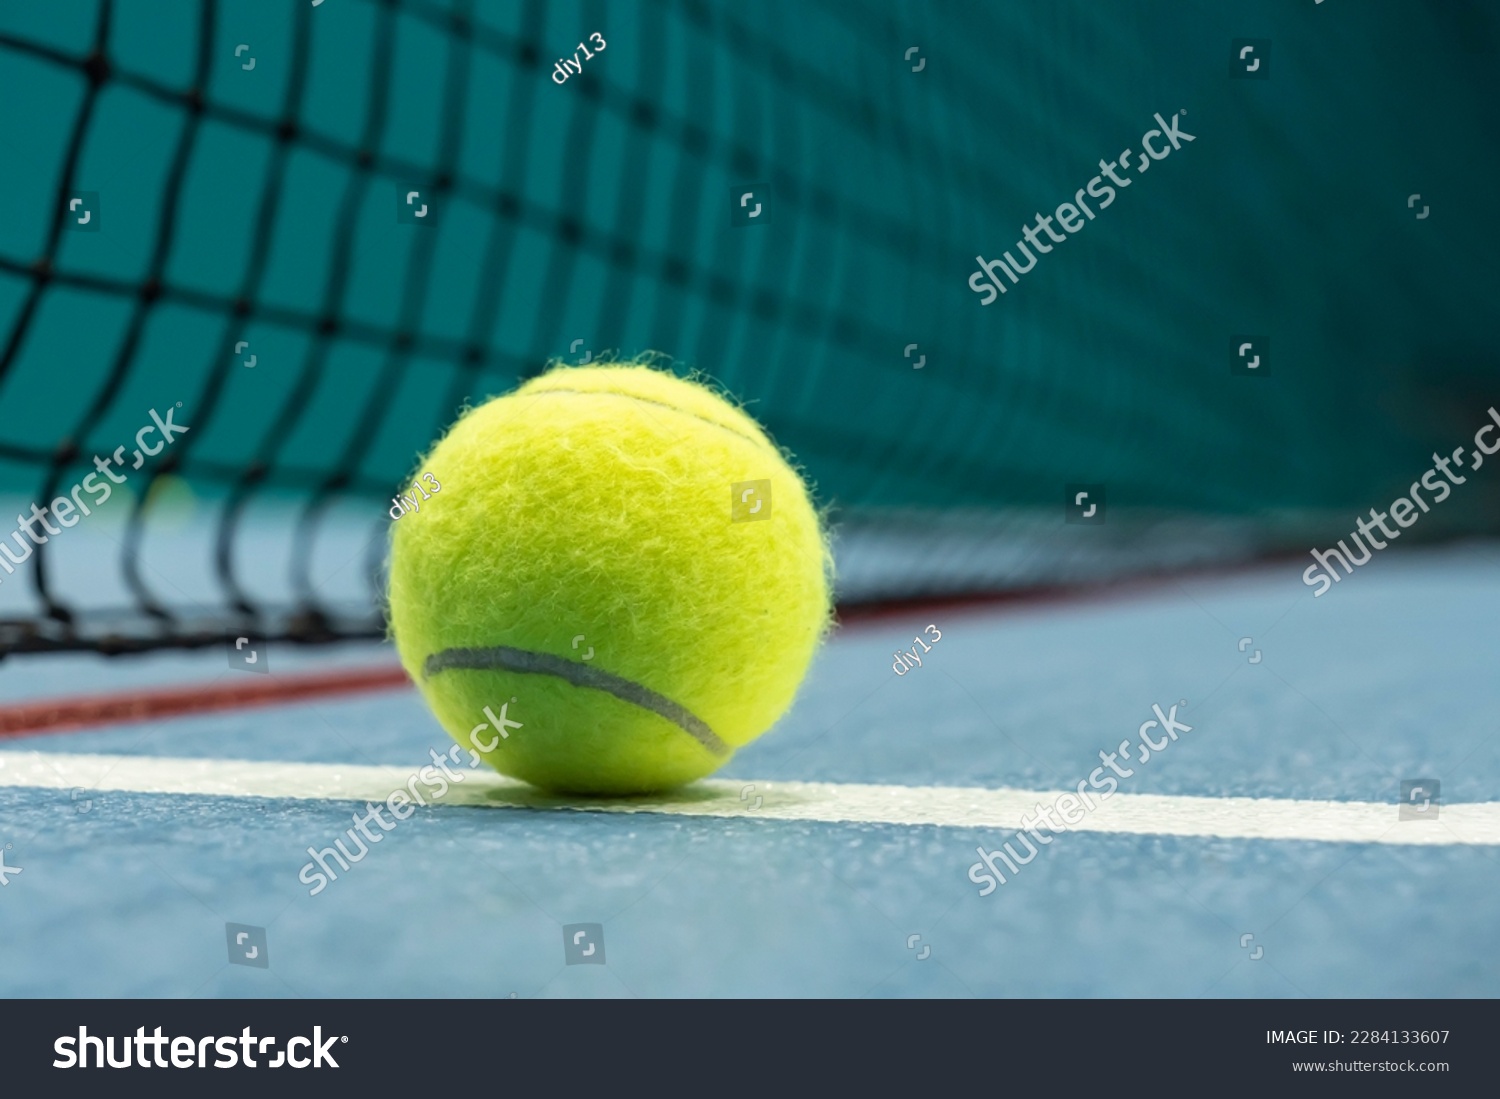 Tennis ball on blue tennis court. the concept of a sporty lifestyle. #2284133607